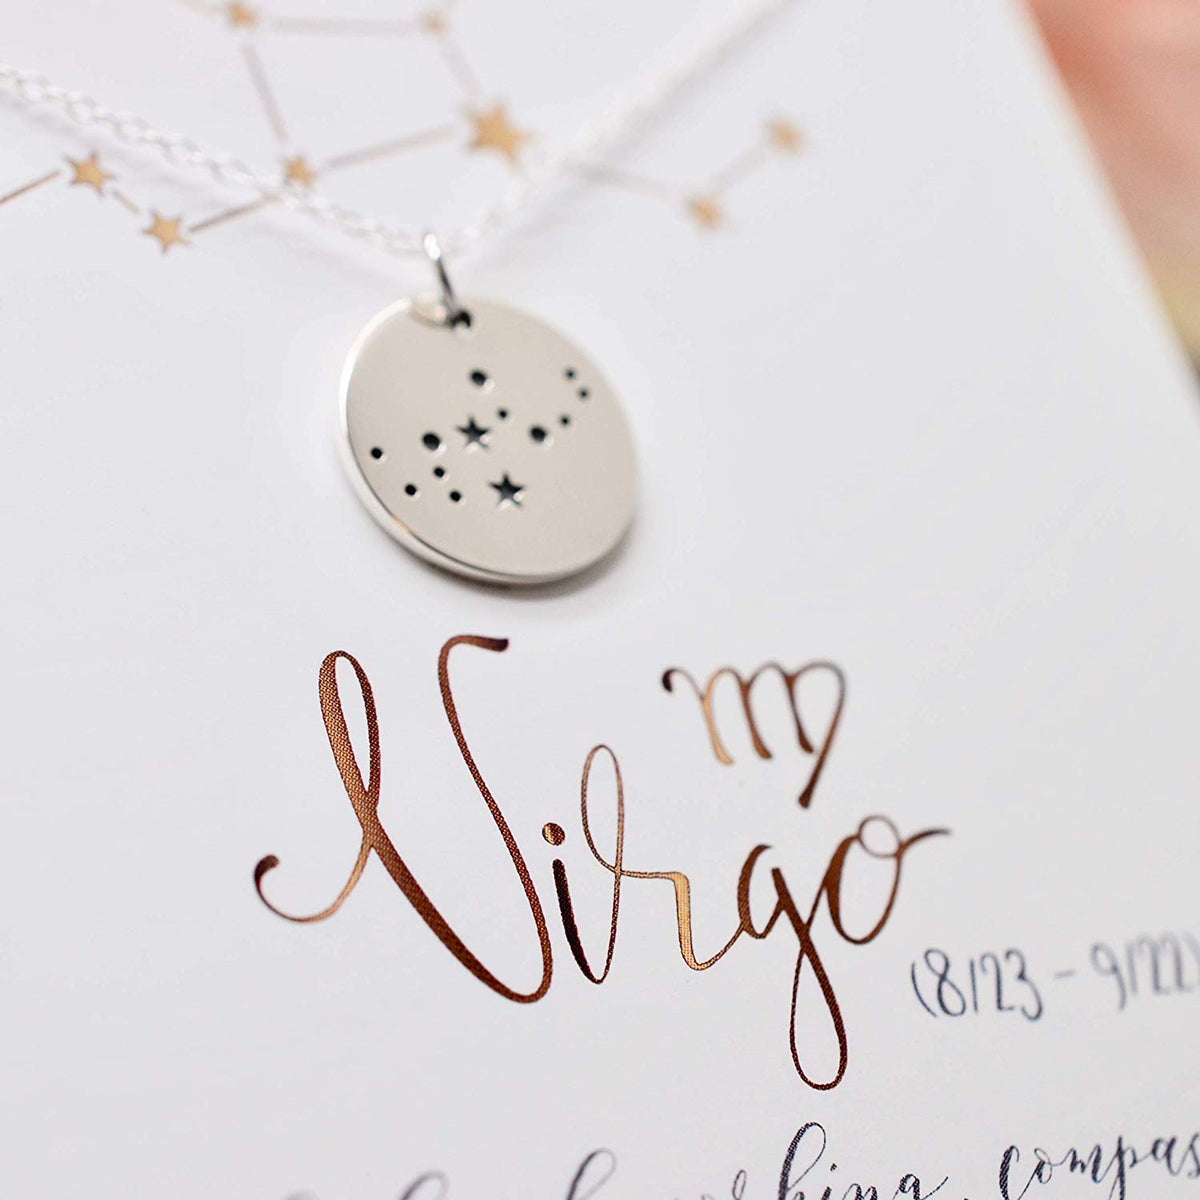 Virgo Zodiac Sign Sterling Silver Constellation Necklace - Love It Personalized